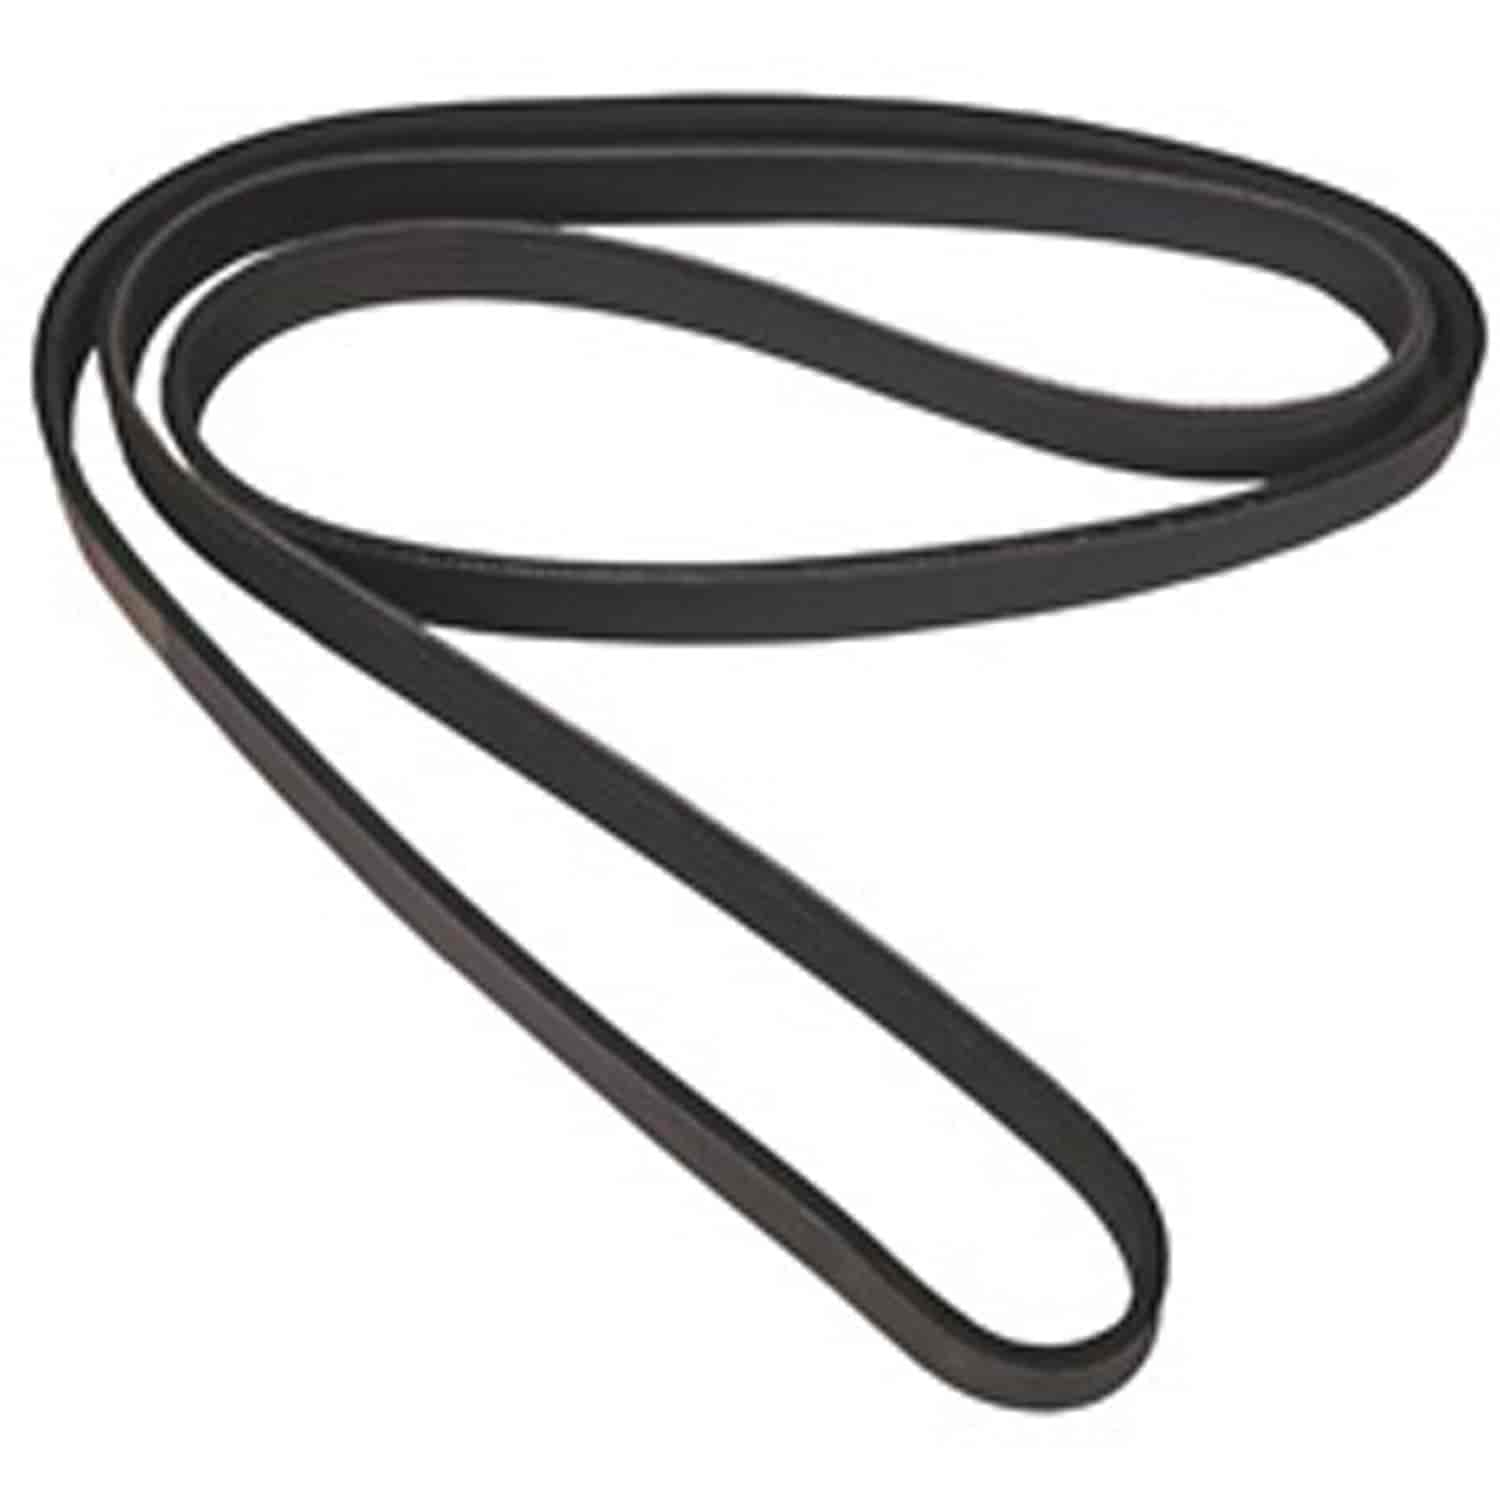 Stock replacement serpentine belt from Omix-ADA, Fits 97-98 Jeep Grand Cherokee ZJ with 5.2 liter and 5.9 liter engines.